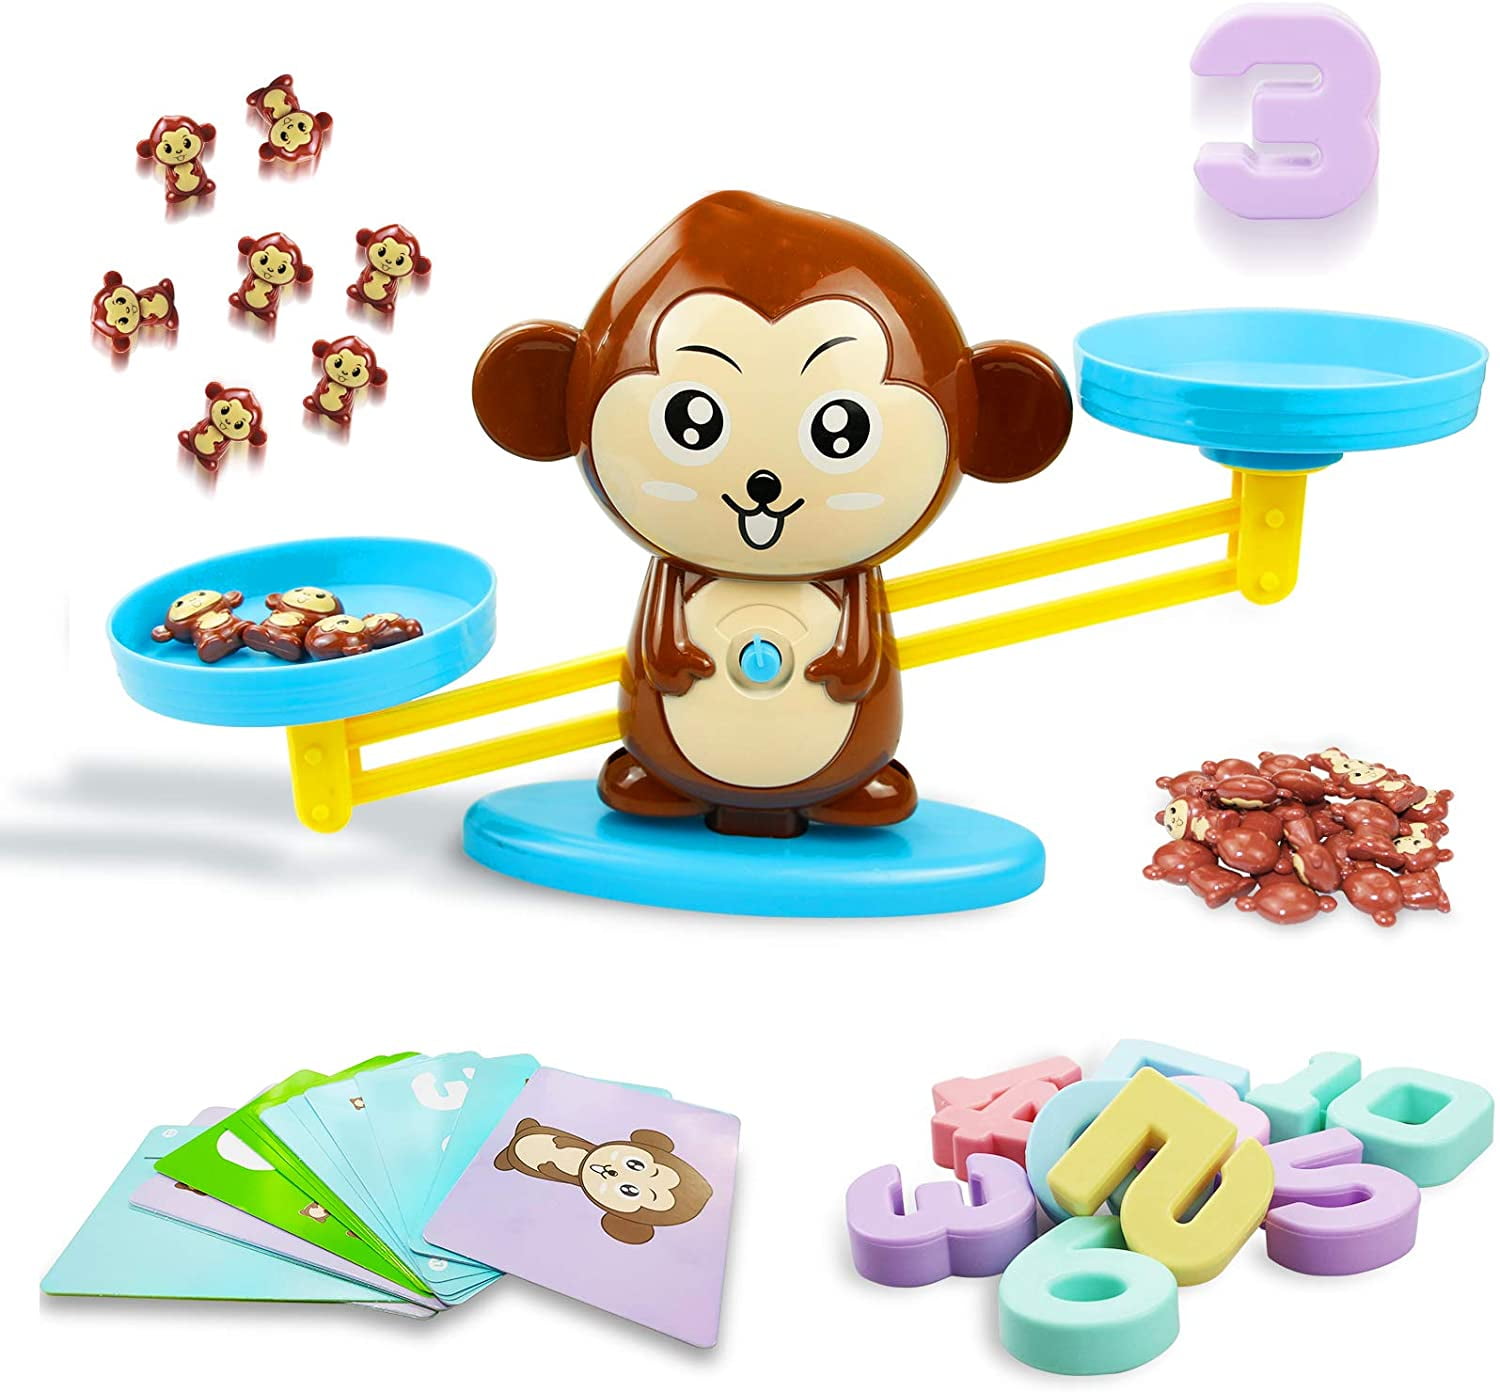 Monkey Balance Maths GameCounting ToysGreat Educational Games for Kids 